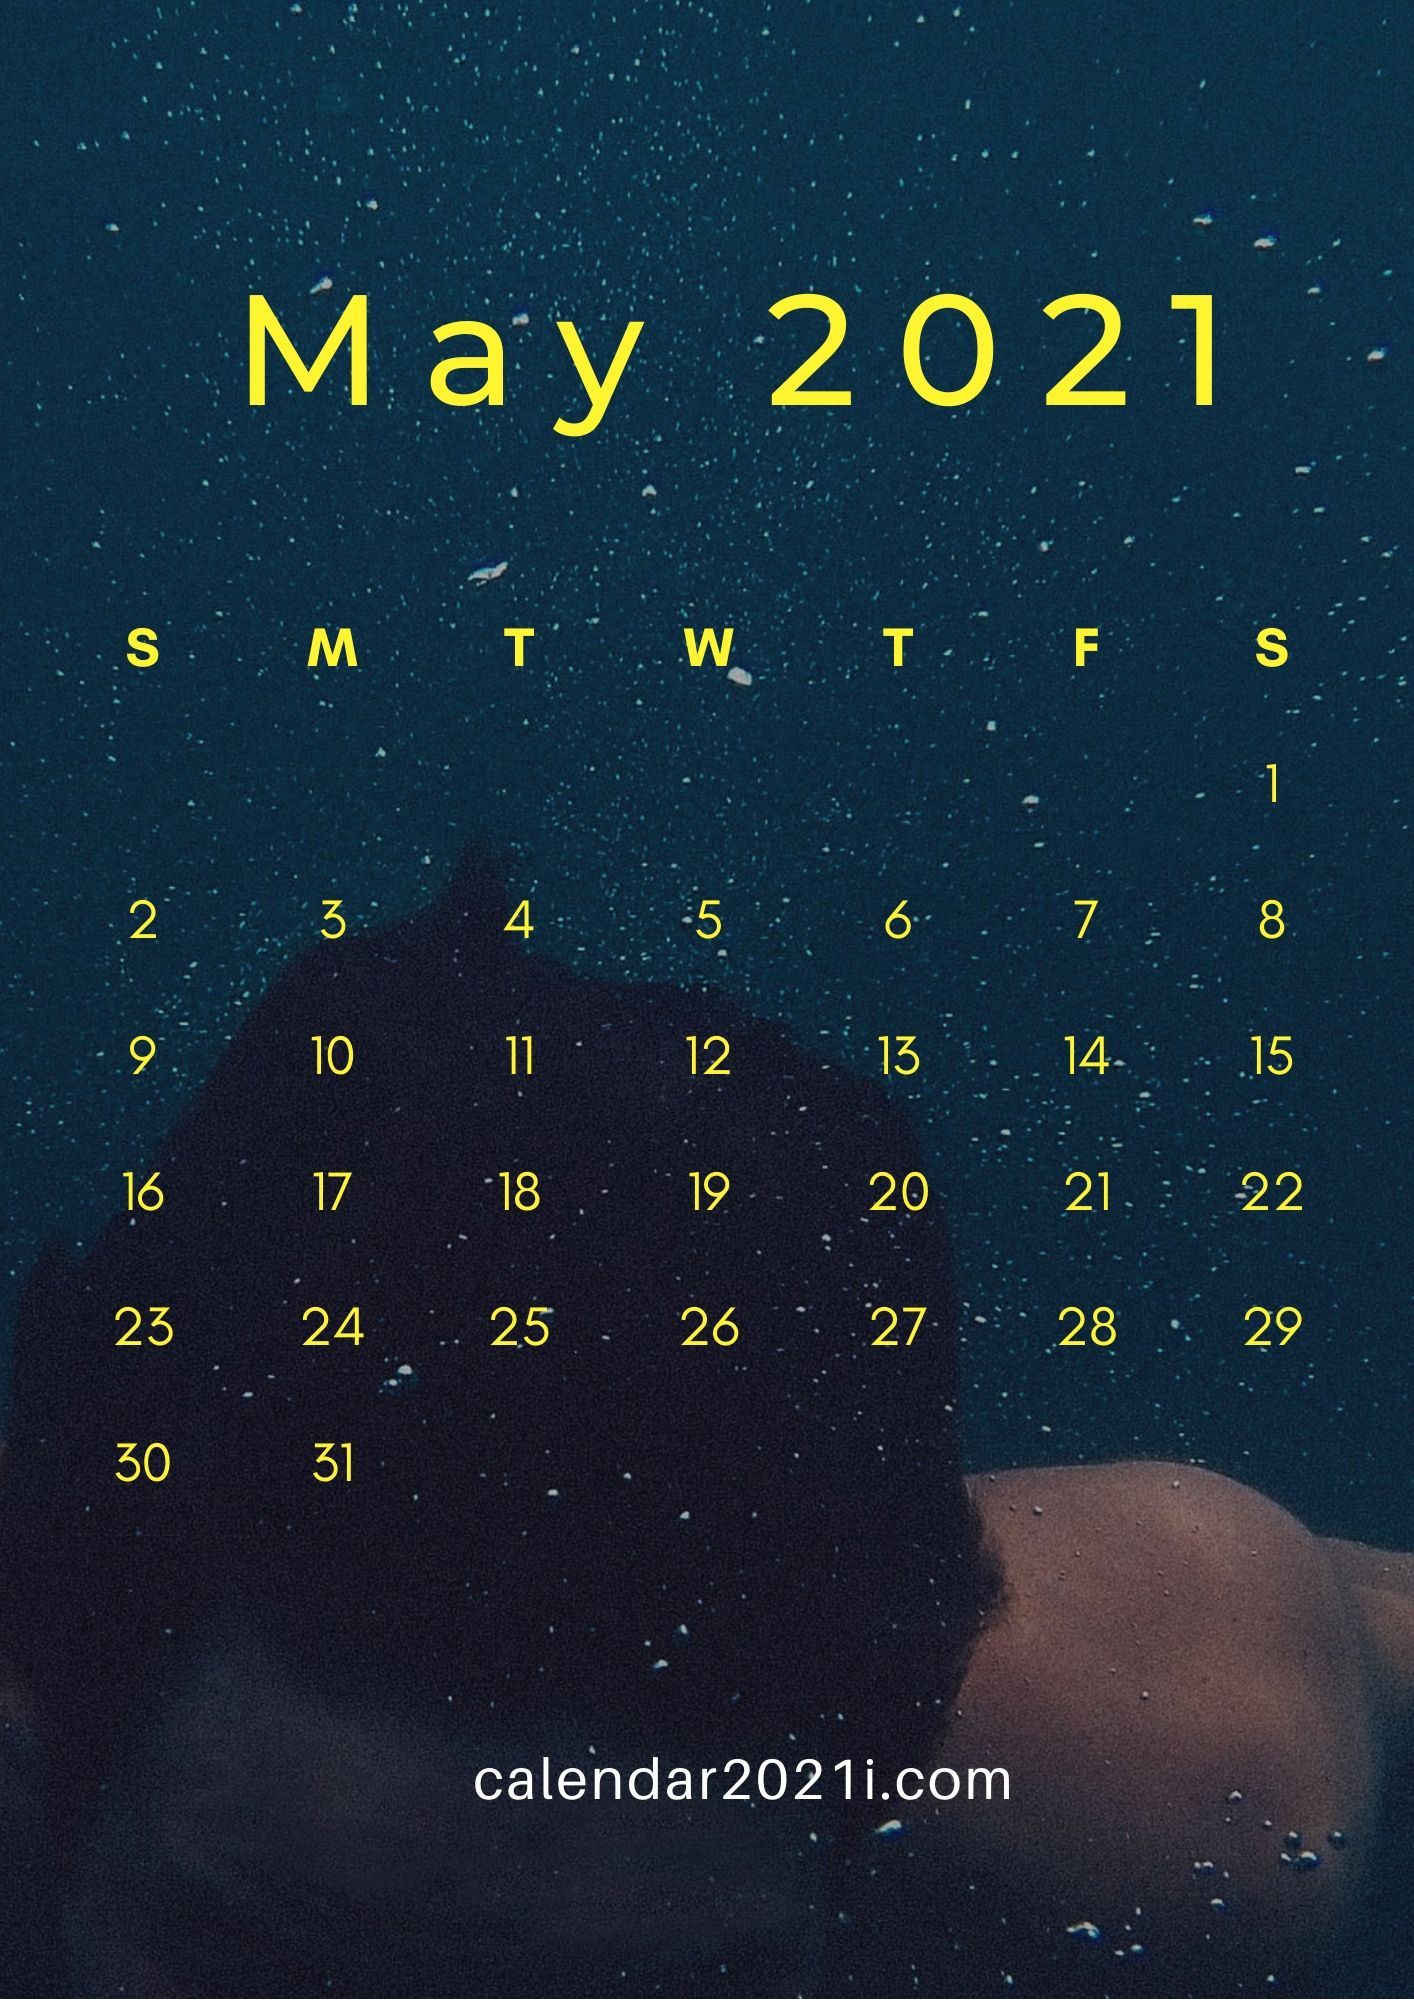 May Calendar HD iPhone Wallpaper To Use As Phone Background